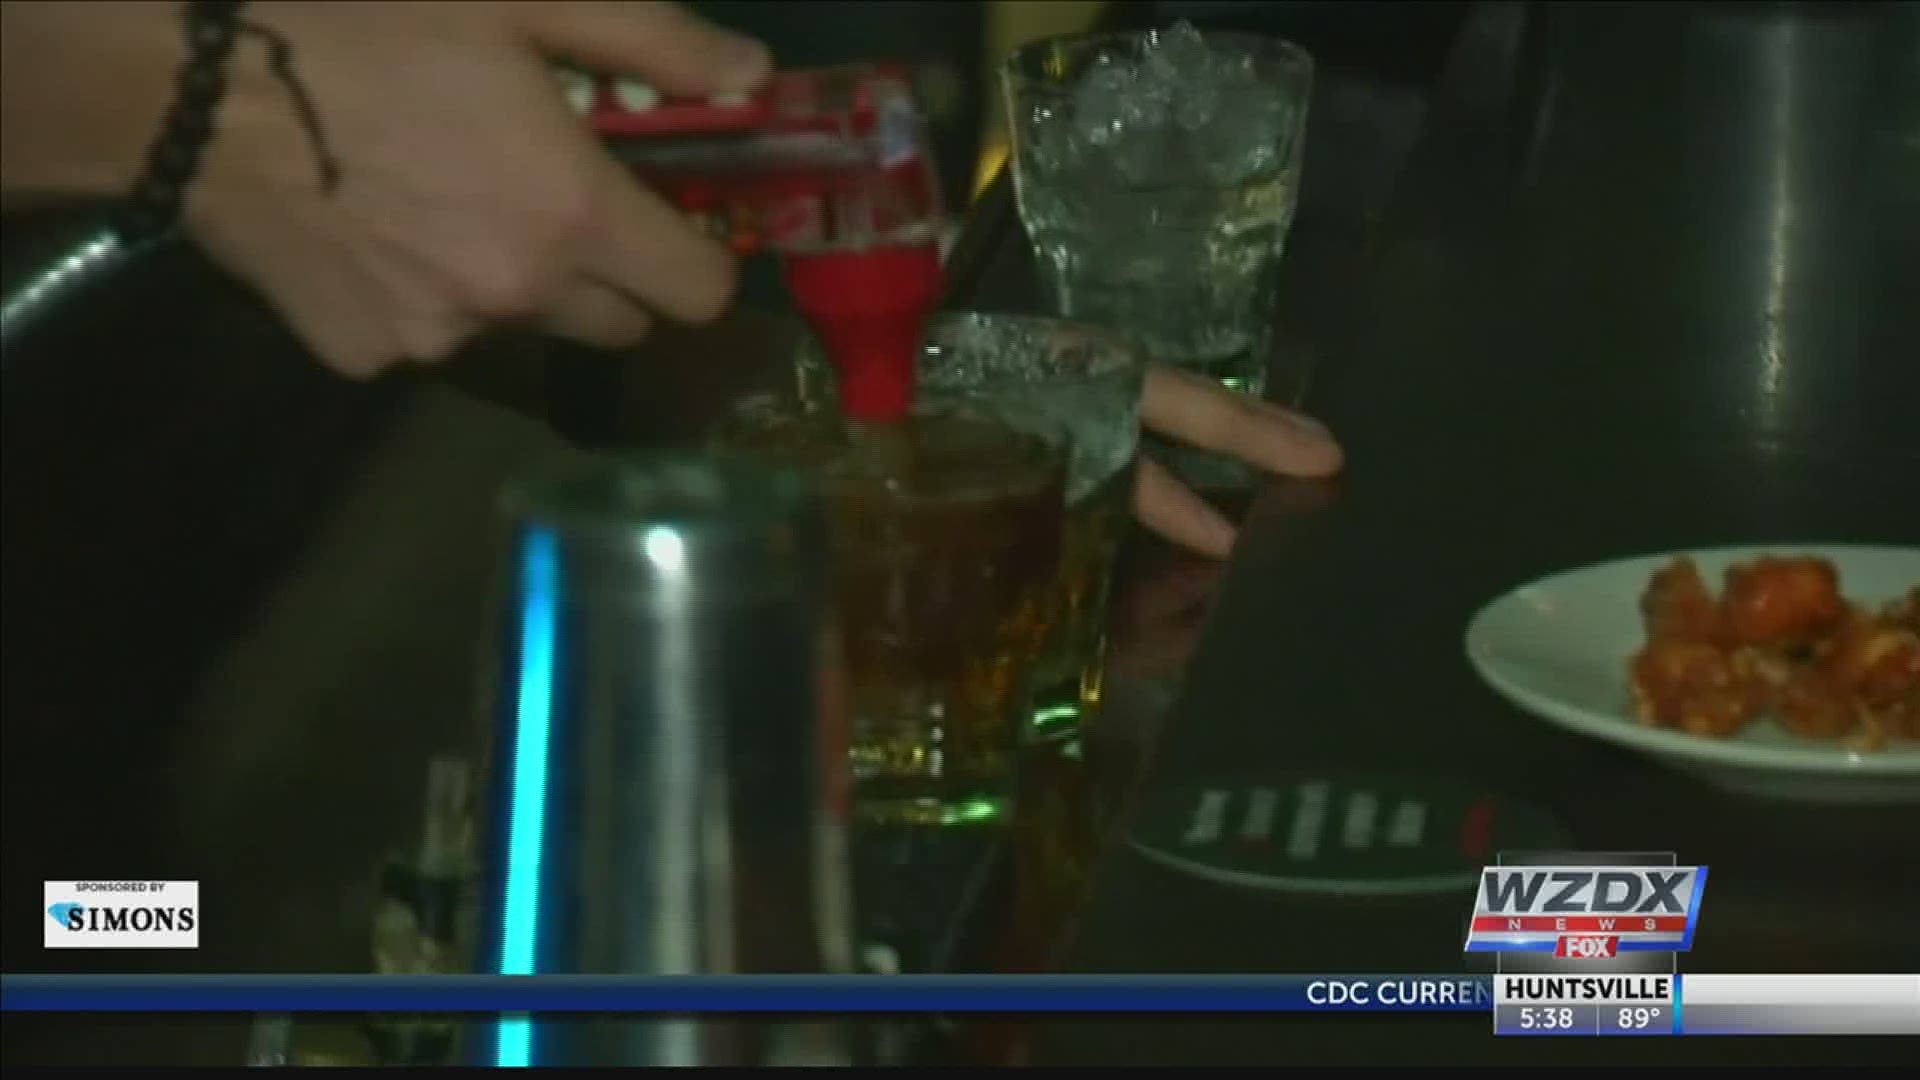 The Alabama Alcoholic Beverage Control board voted to restrict late-night alcohol sales.